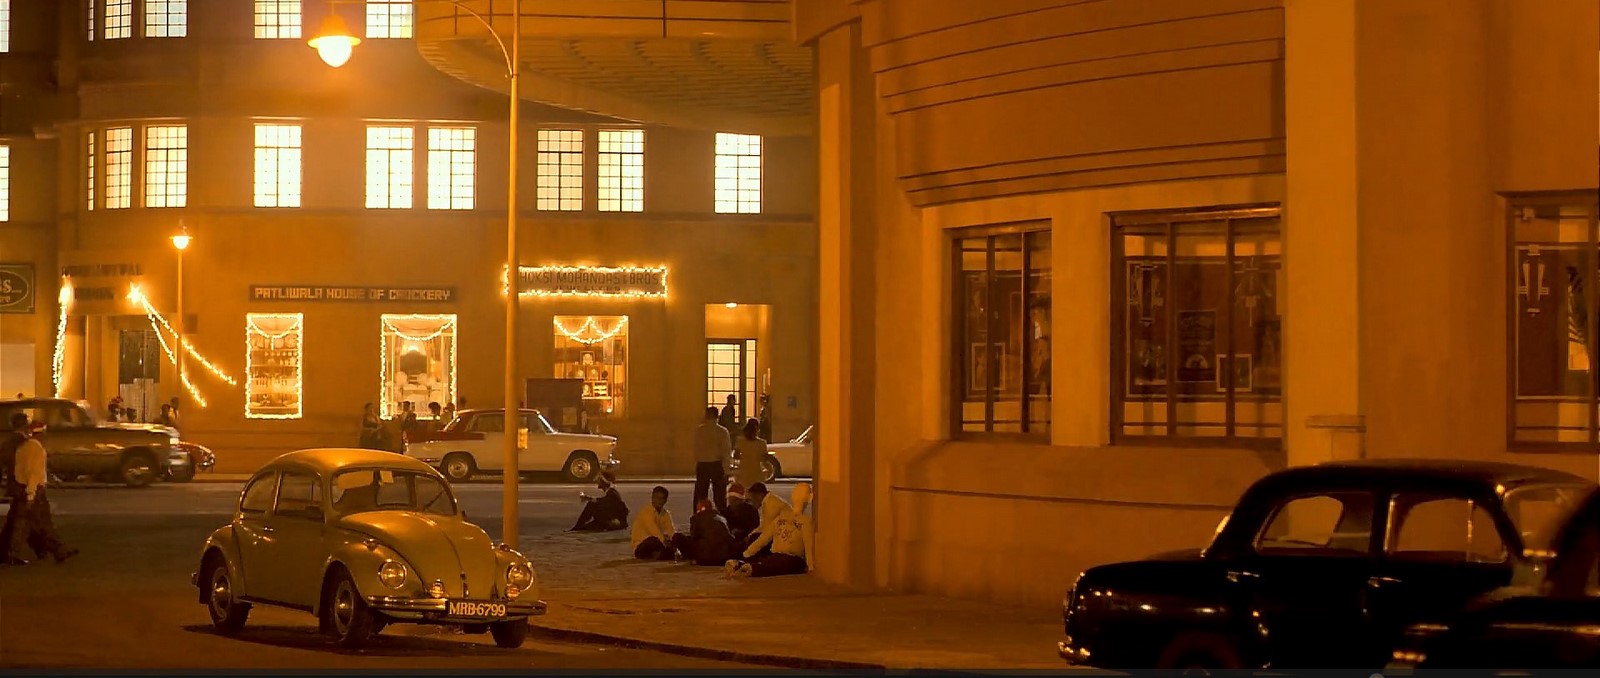 An architectural review of Bombay Velvet - Sheet8